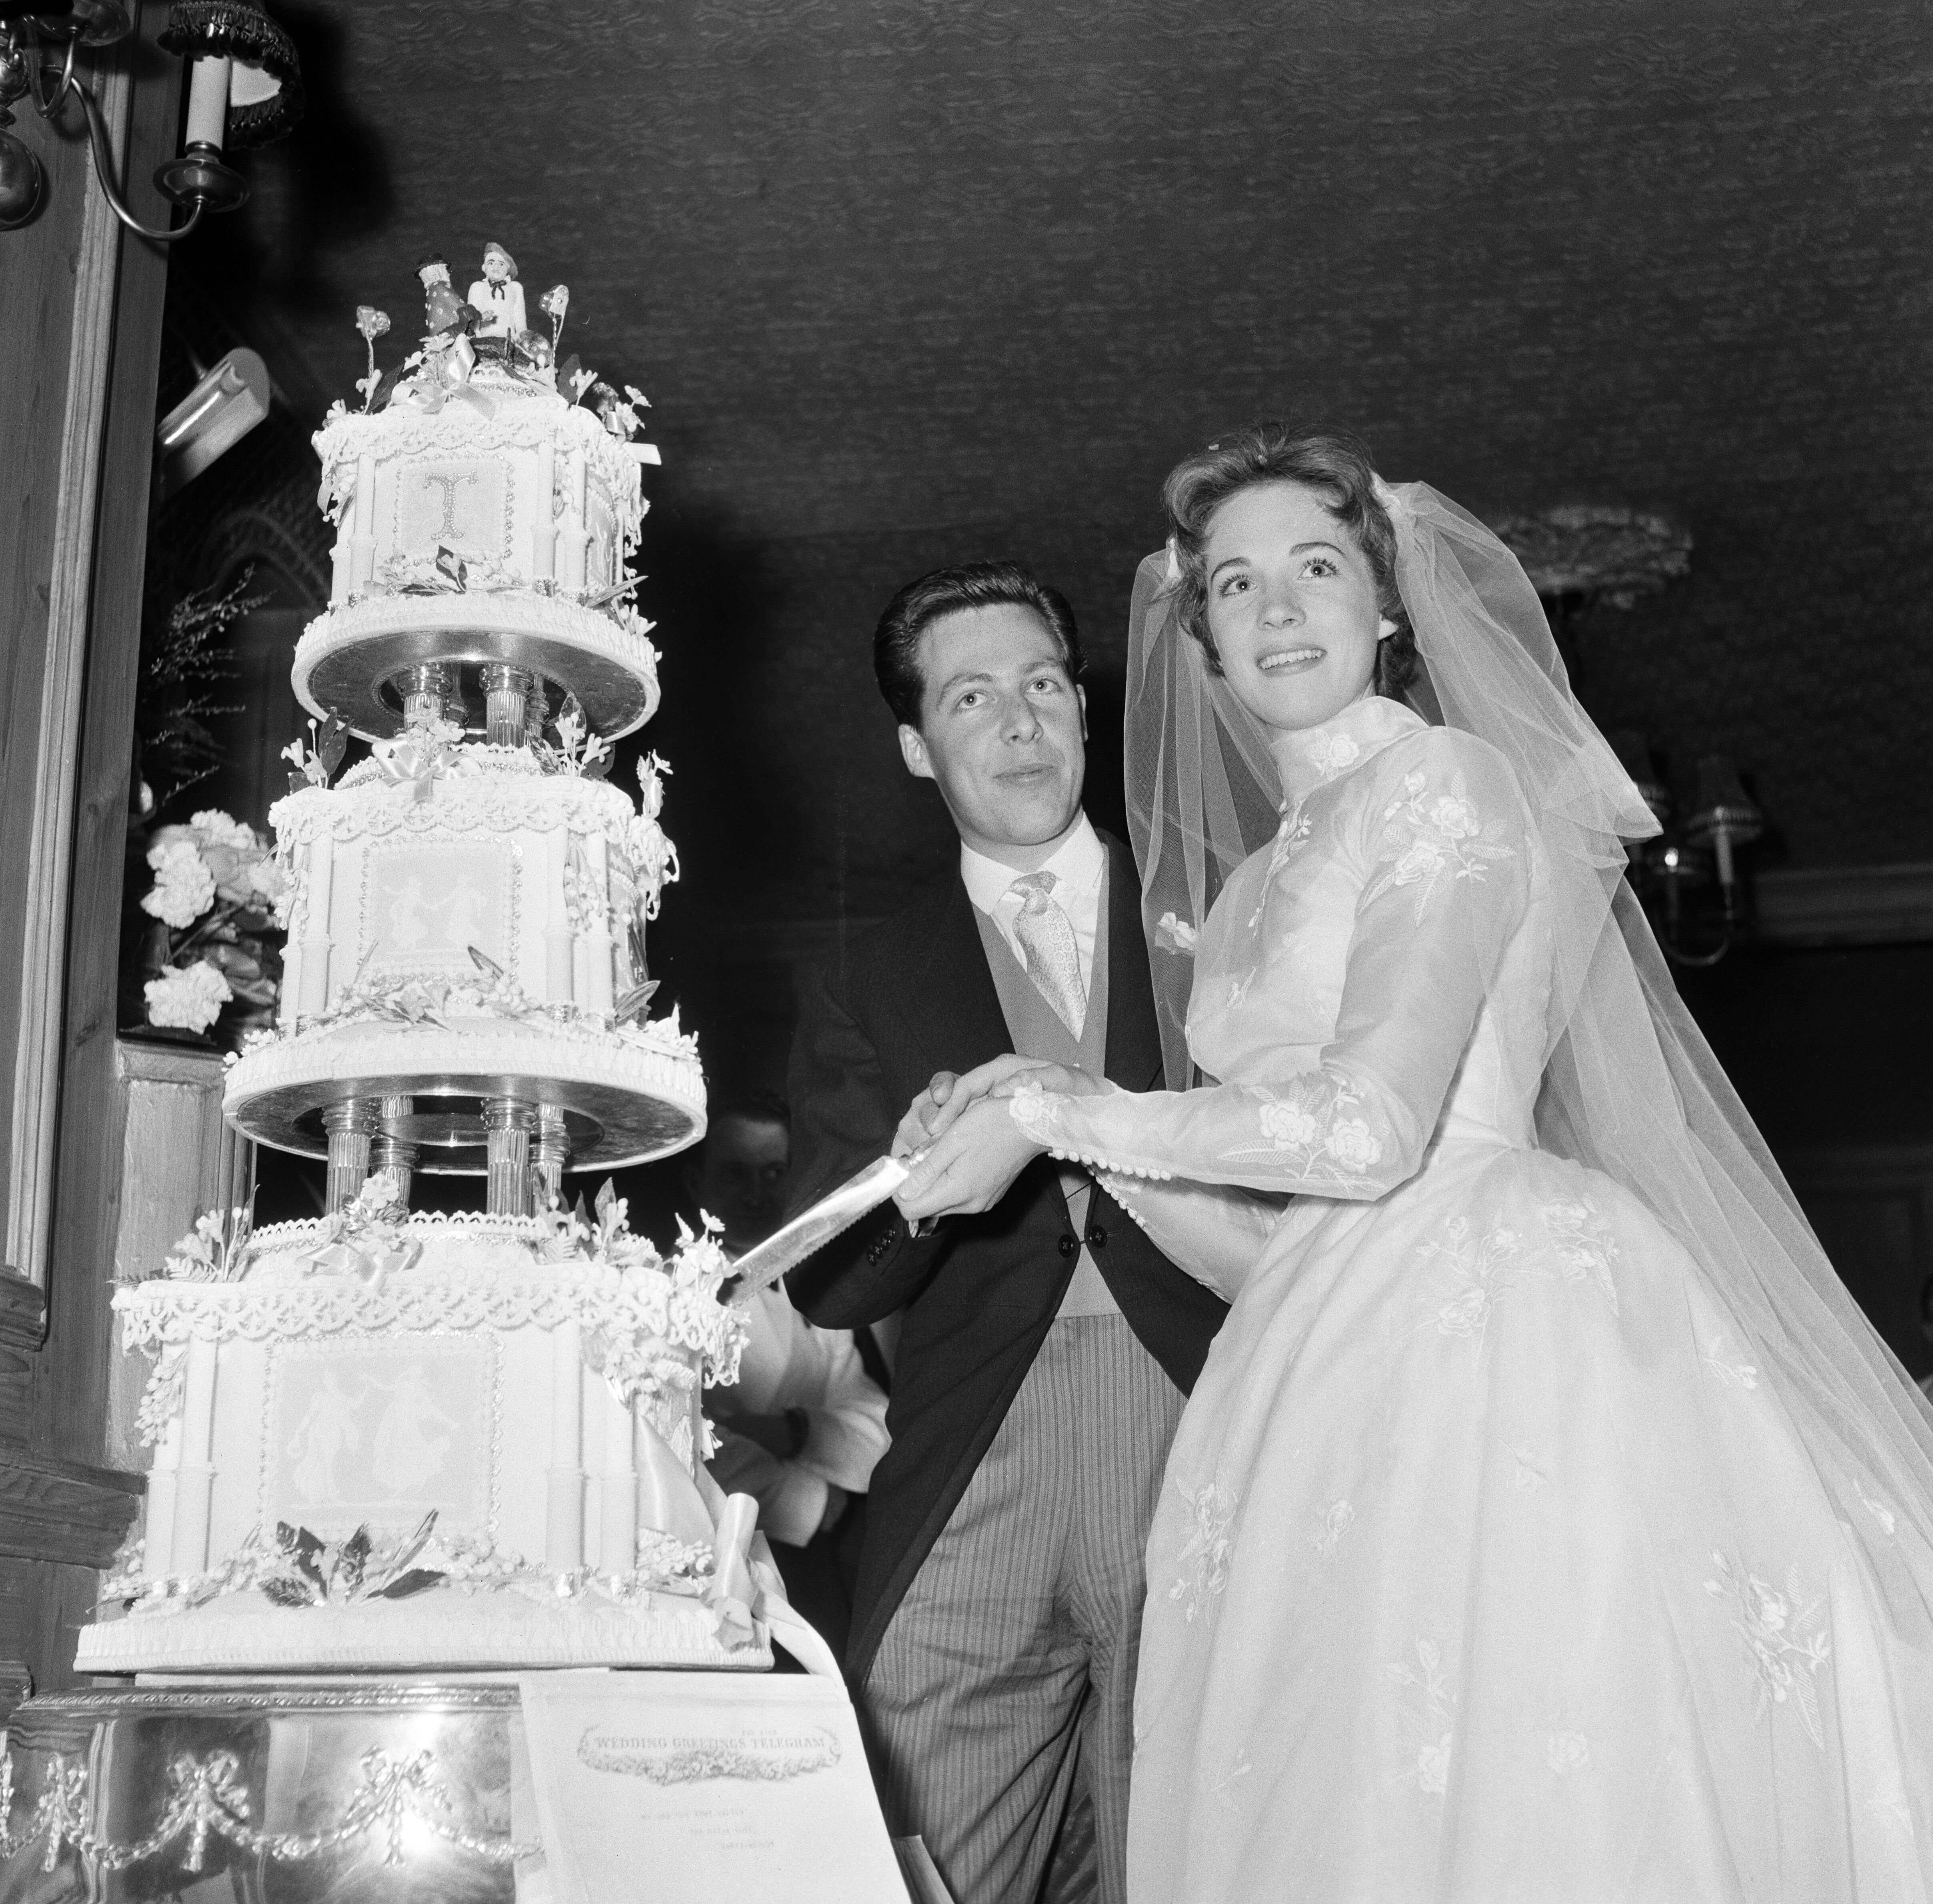 Tony Walton and Julie Andrews' wedding at St Mary Oatlands Church, in Weybridge, Surrey, on May 10, 1959. | Source: Arthur Sidey/Mirrorpix/Getty Images